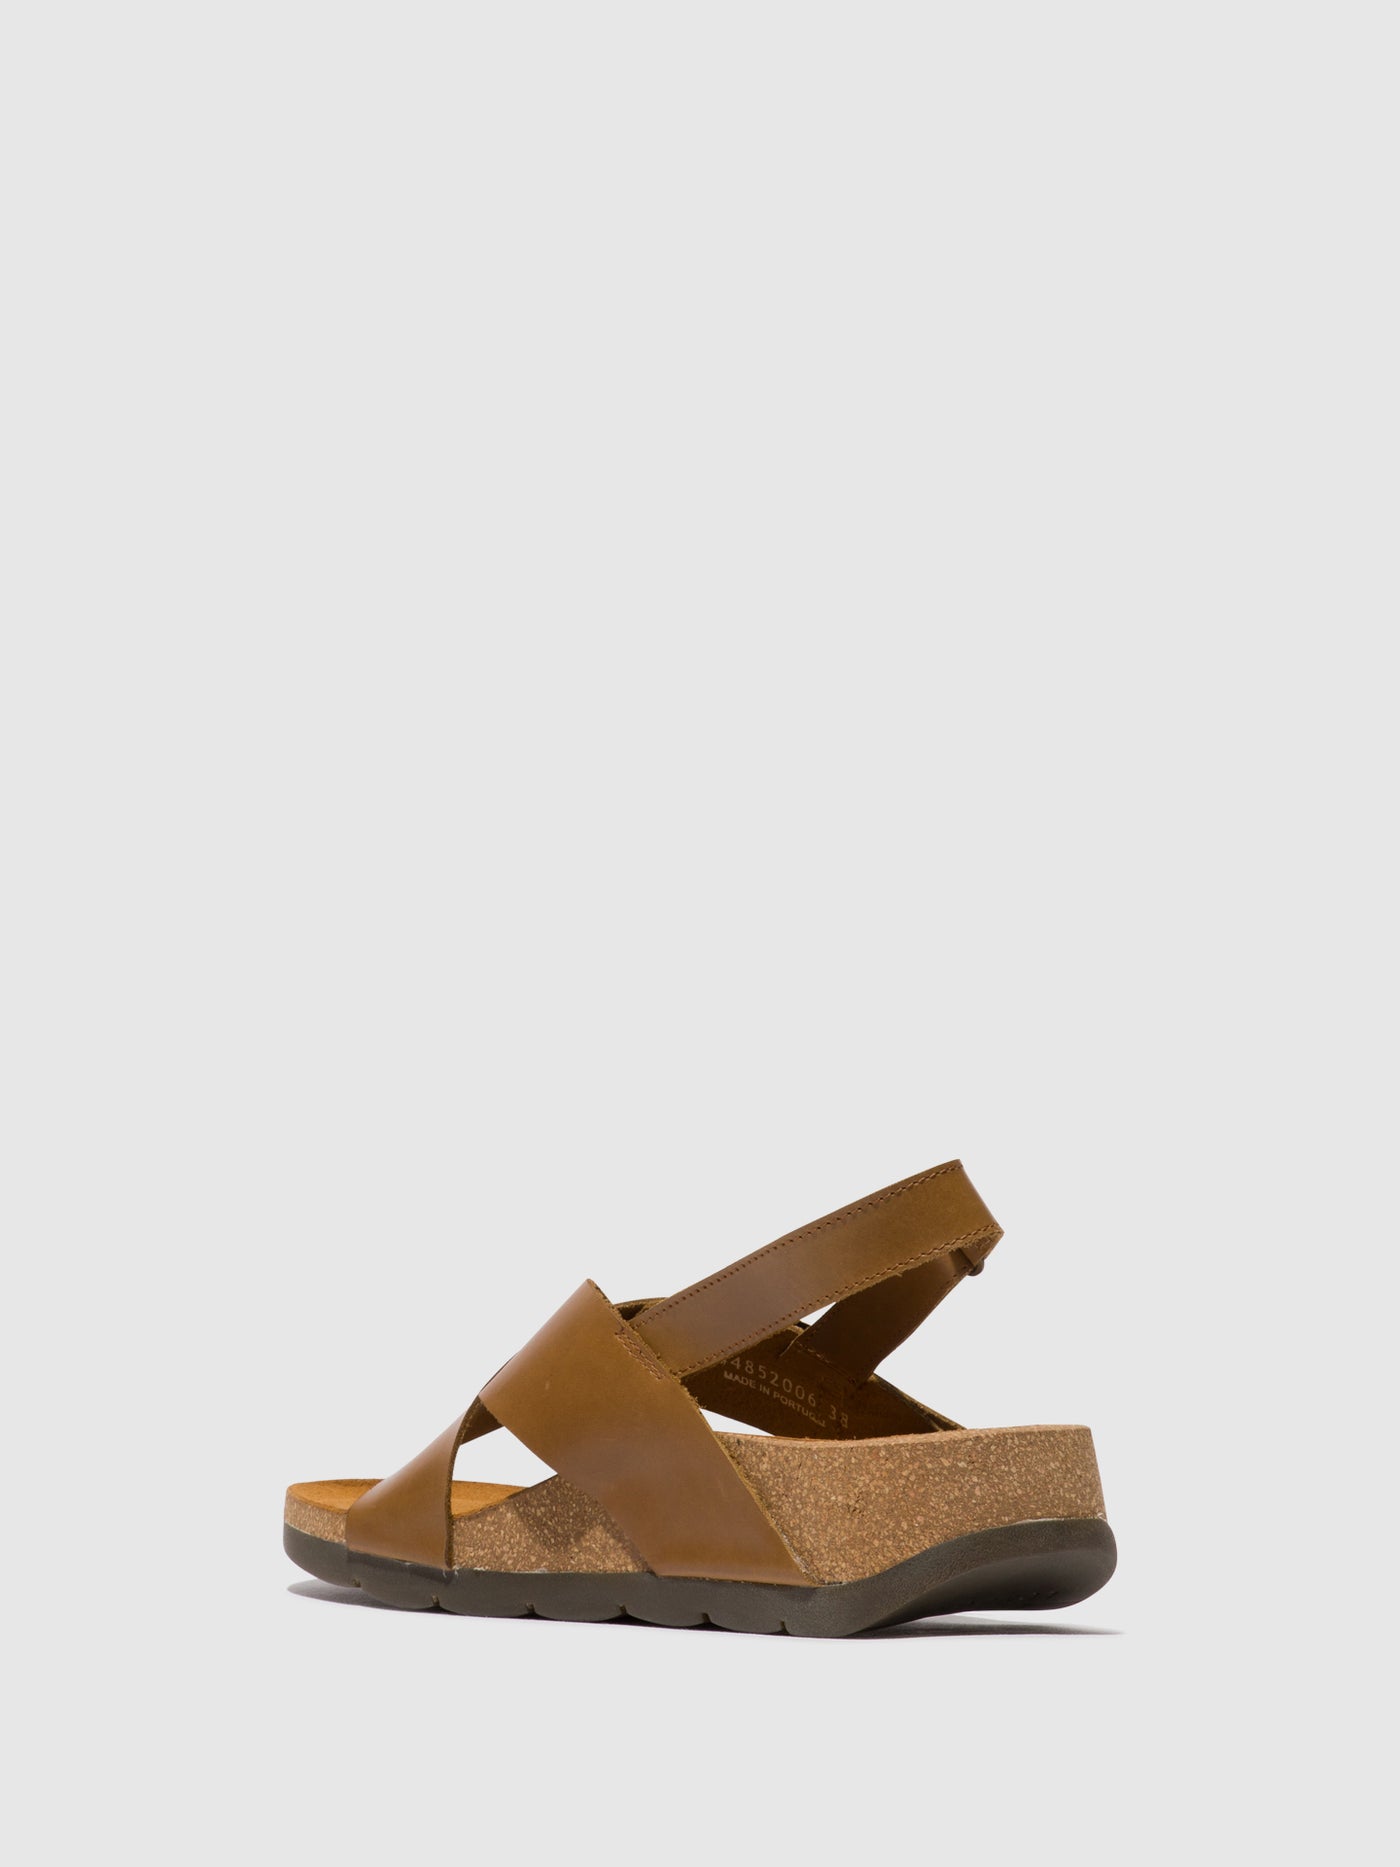 Crossover Sandals CHLO852FLY CAMEL